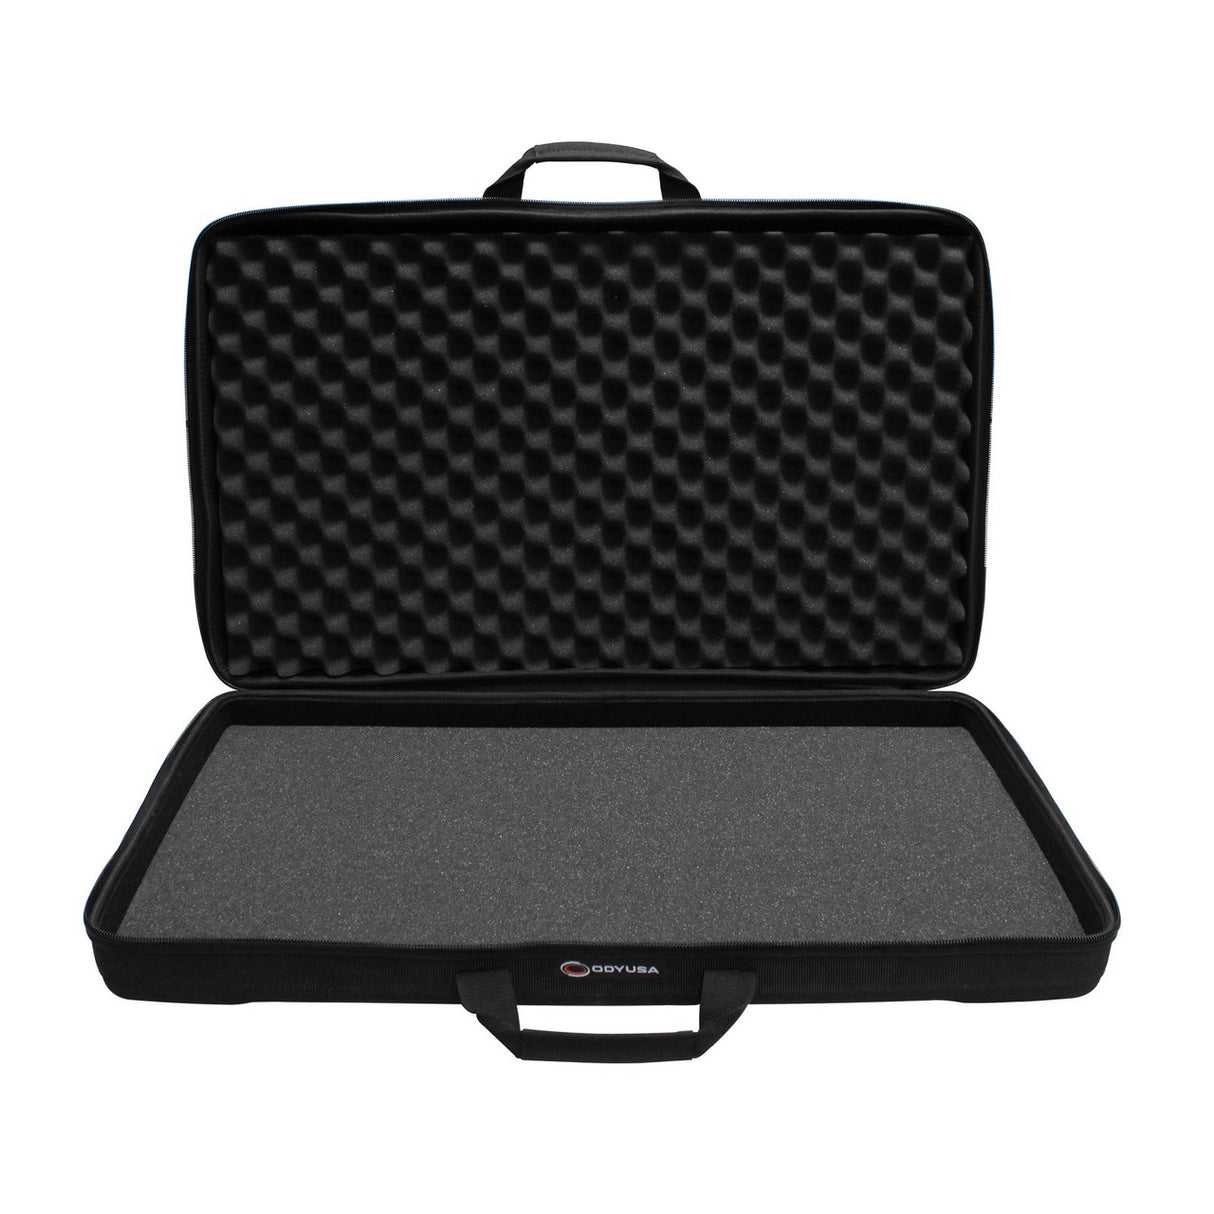 Odyssey Cases BMSLDJCL | Universal DJ Controller Carrying Bag Large